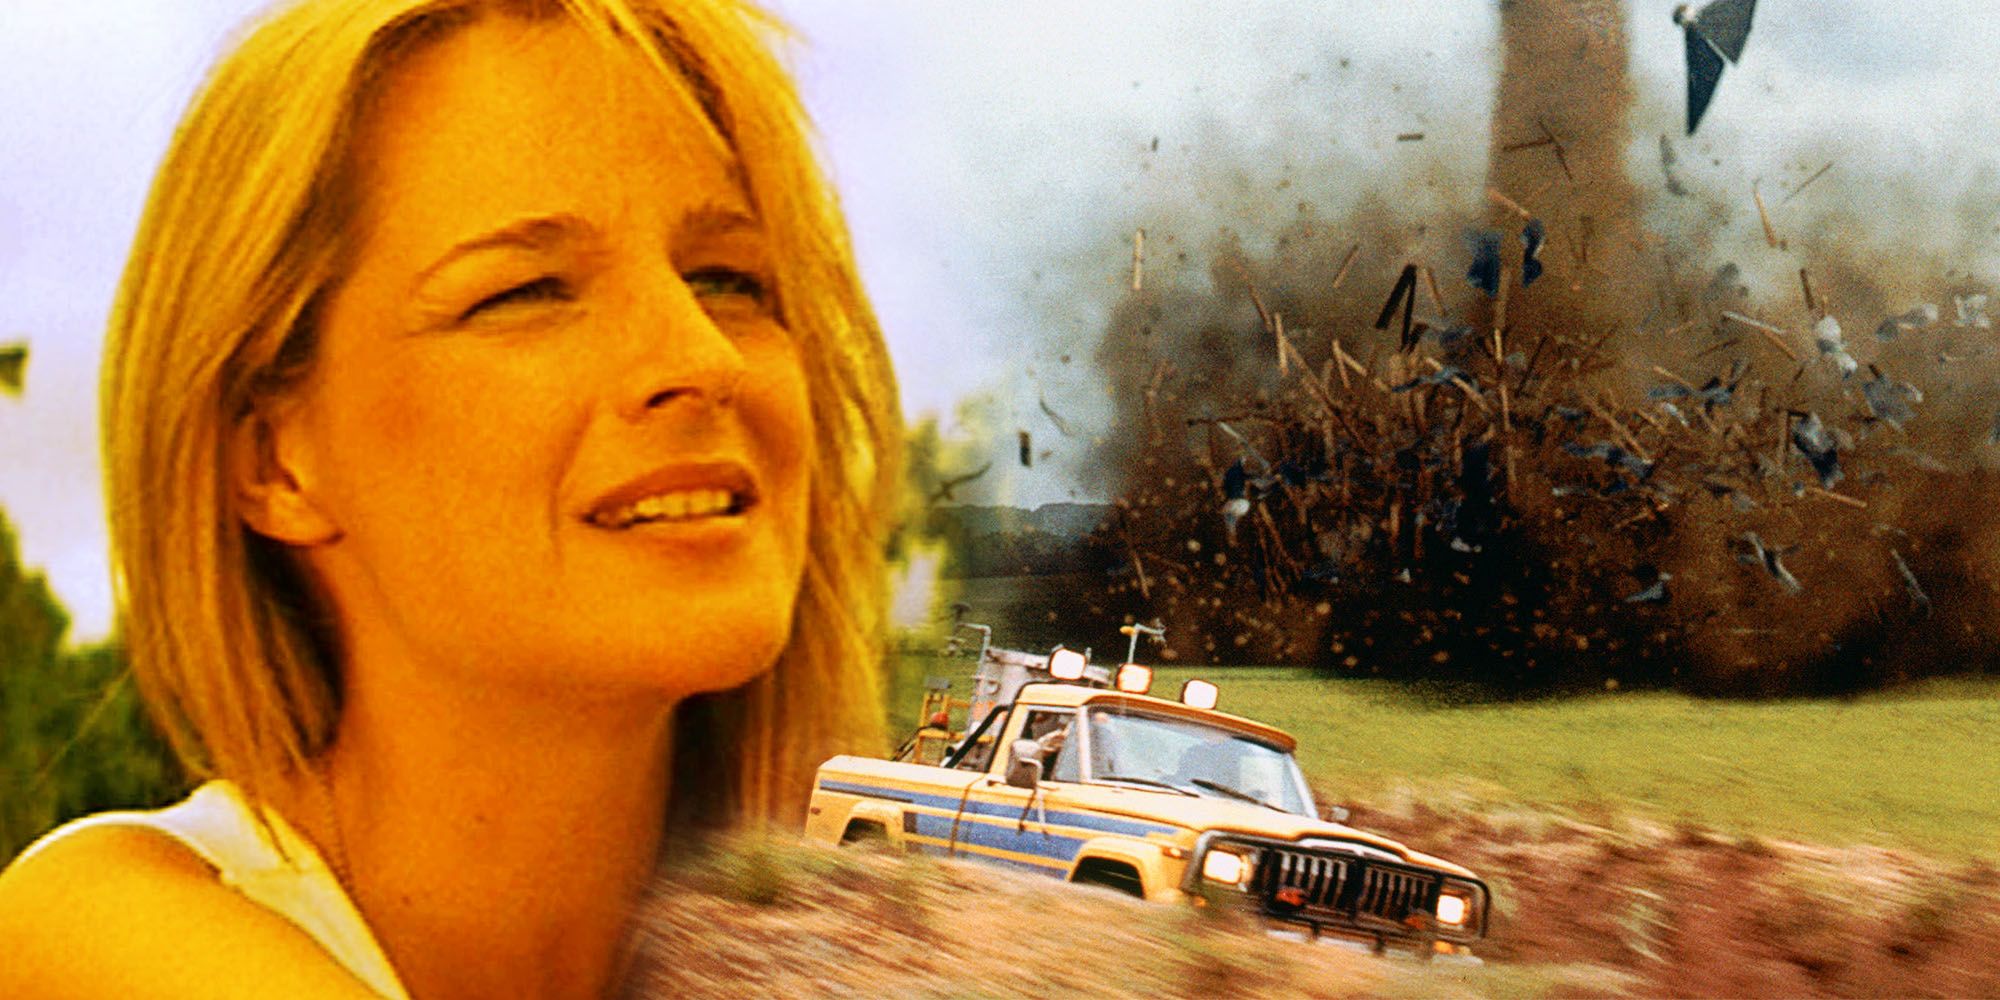 Helen Hunt in Twister and a tornado